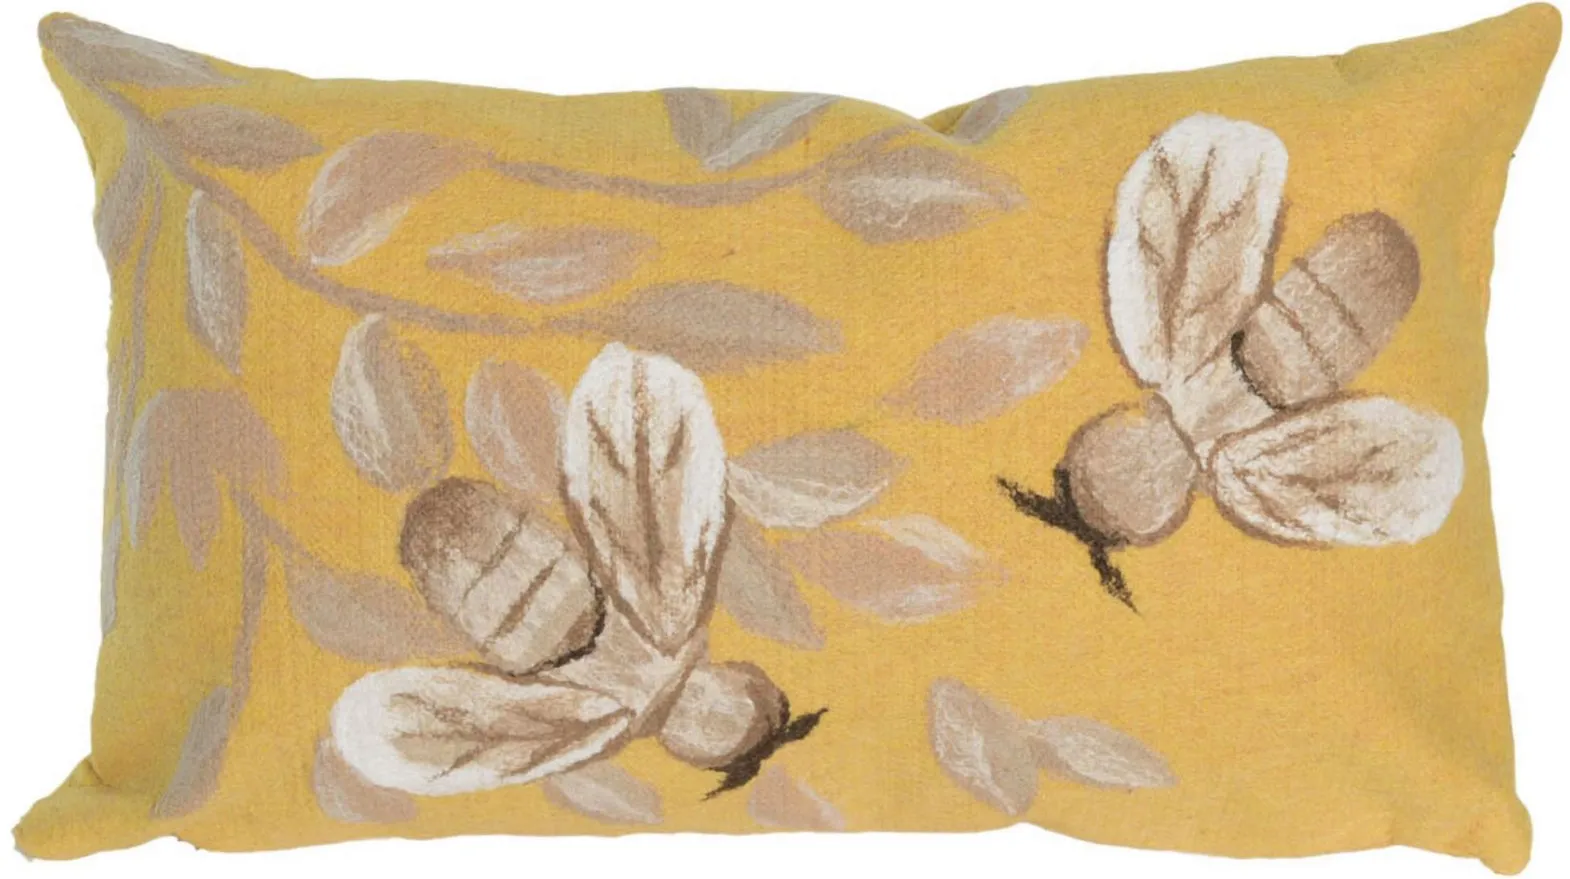 Liora Manne Visions III Bees Pillow in Honey by Trans-Ocean Import Co Inc